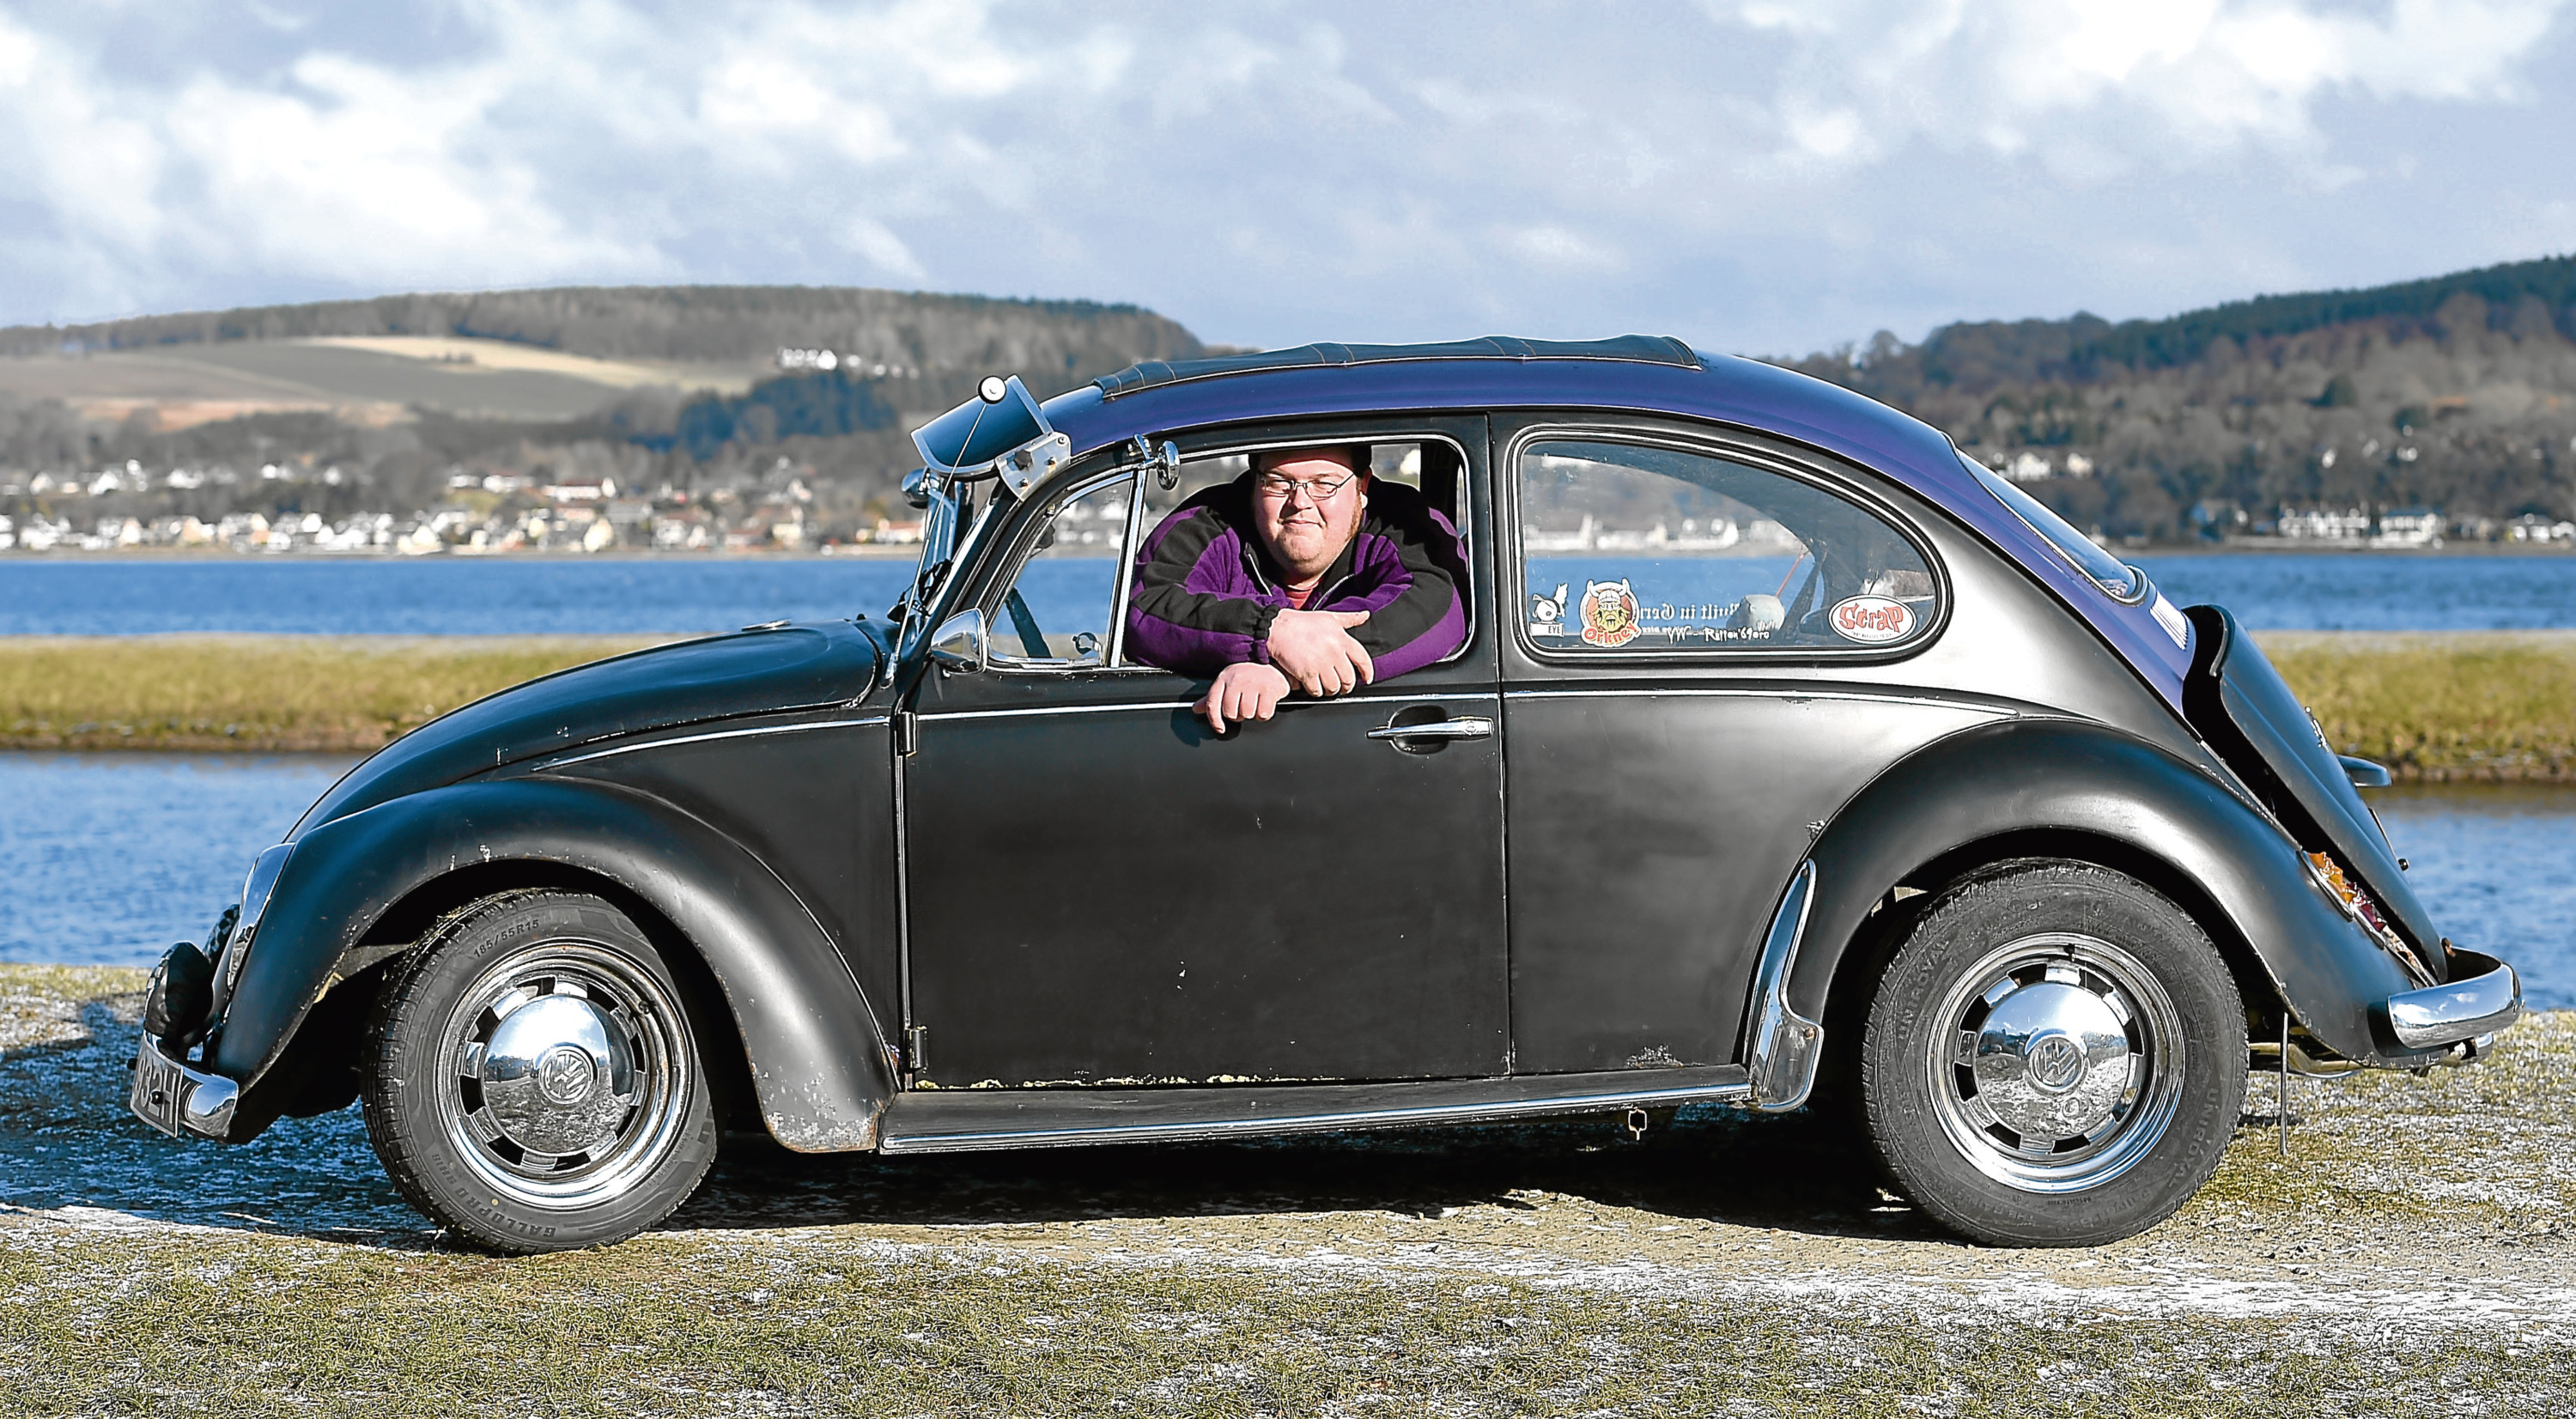 Mark Rudkin of Inverness who has a 1969 classic Beetle.